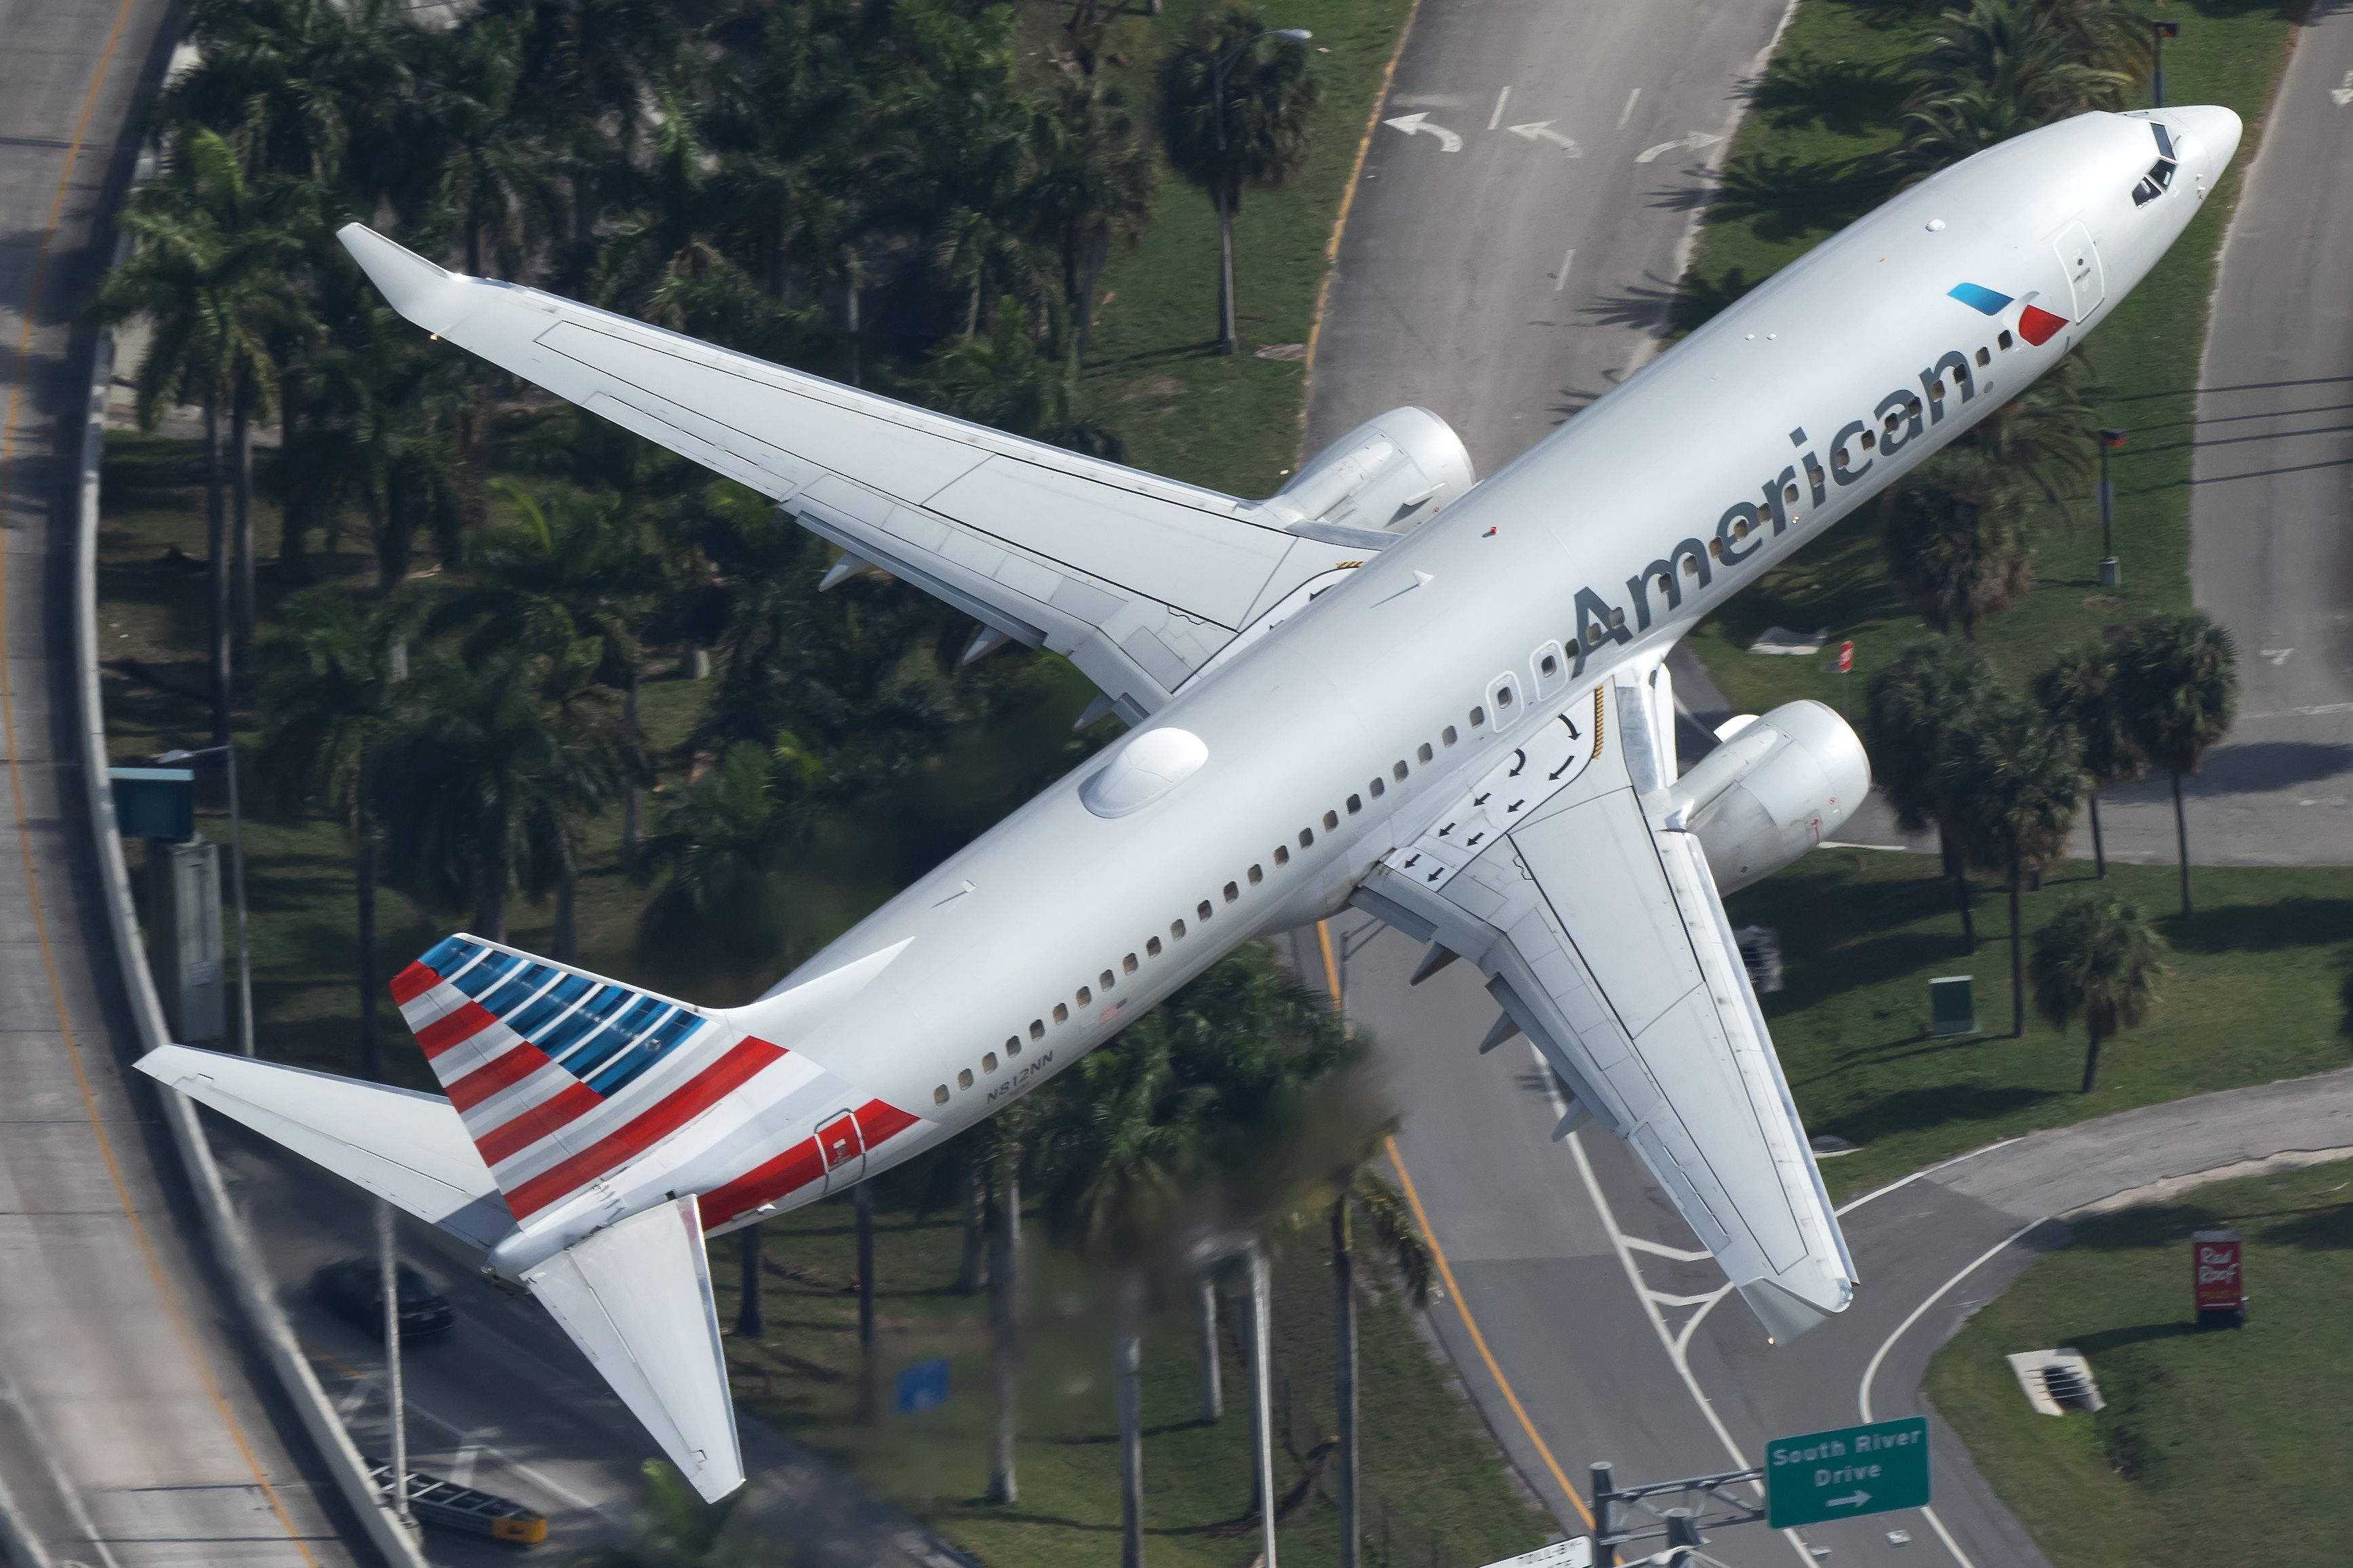 American Airlines flight schedule expanded for winter travel